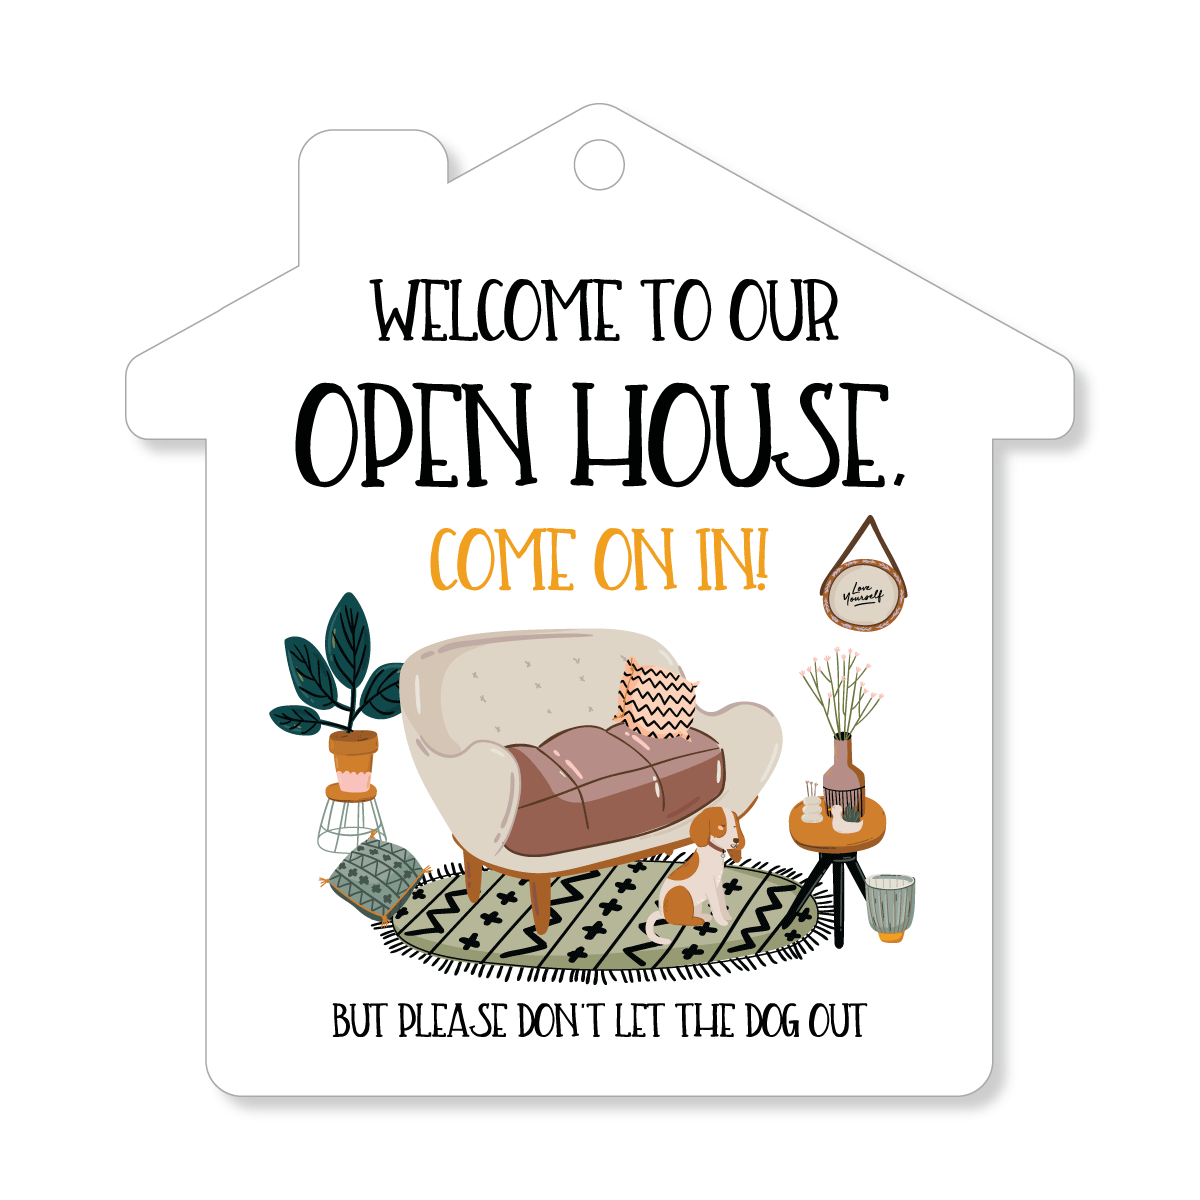 Open House Door Sign - Please don't let the dog out - All Things Real Estate